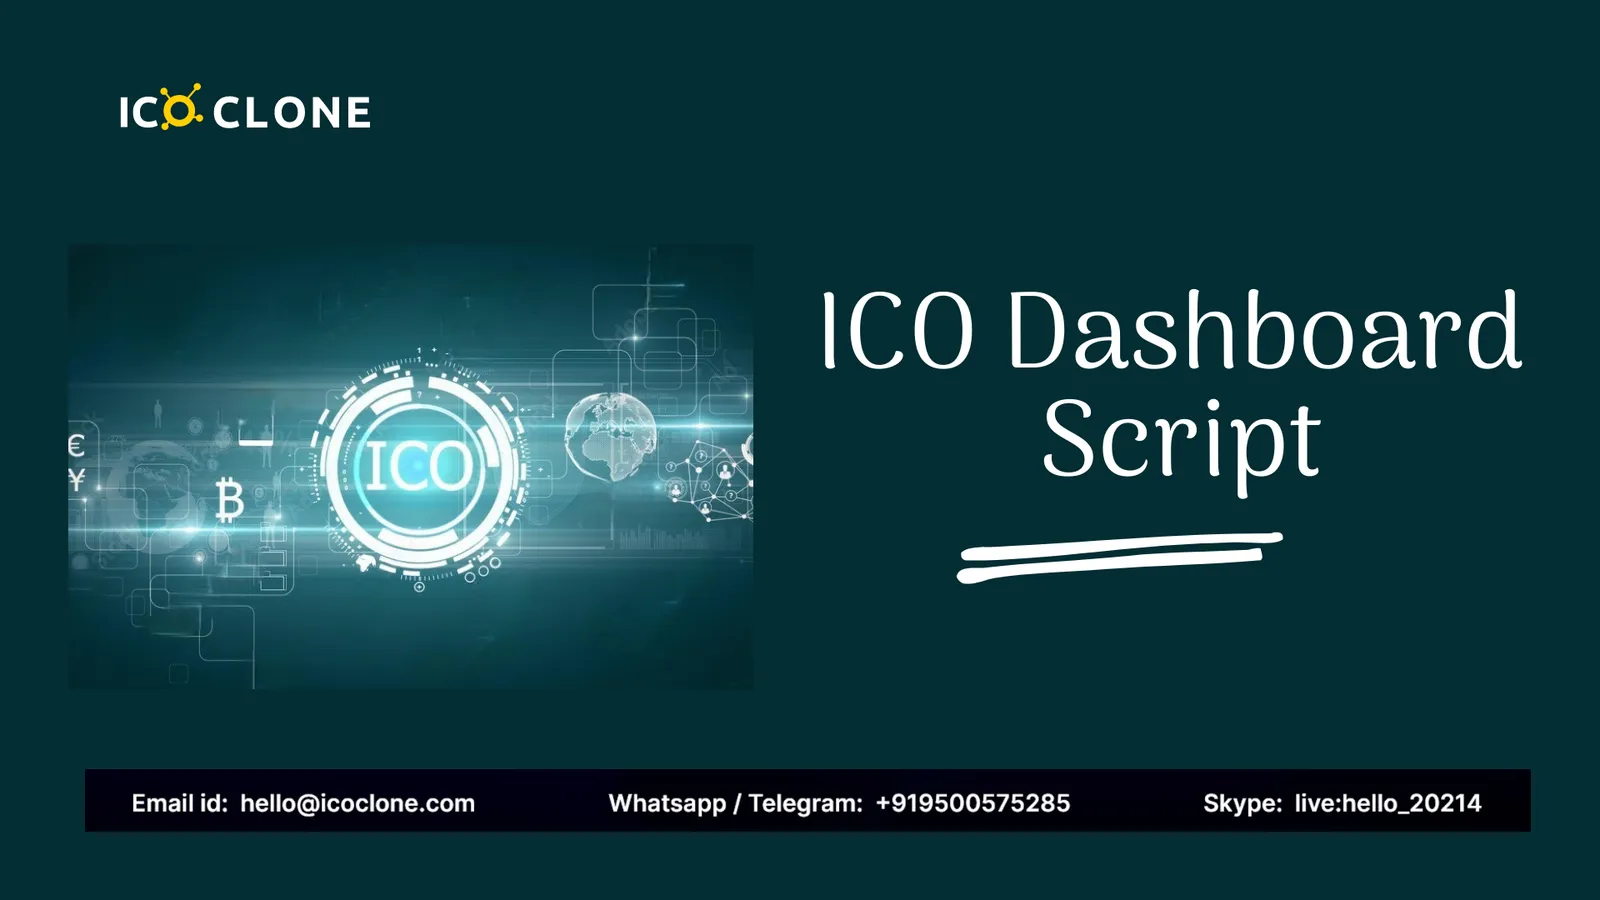 How does ICO Dashboard Script help Startups?